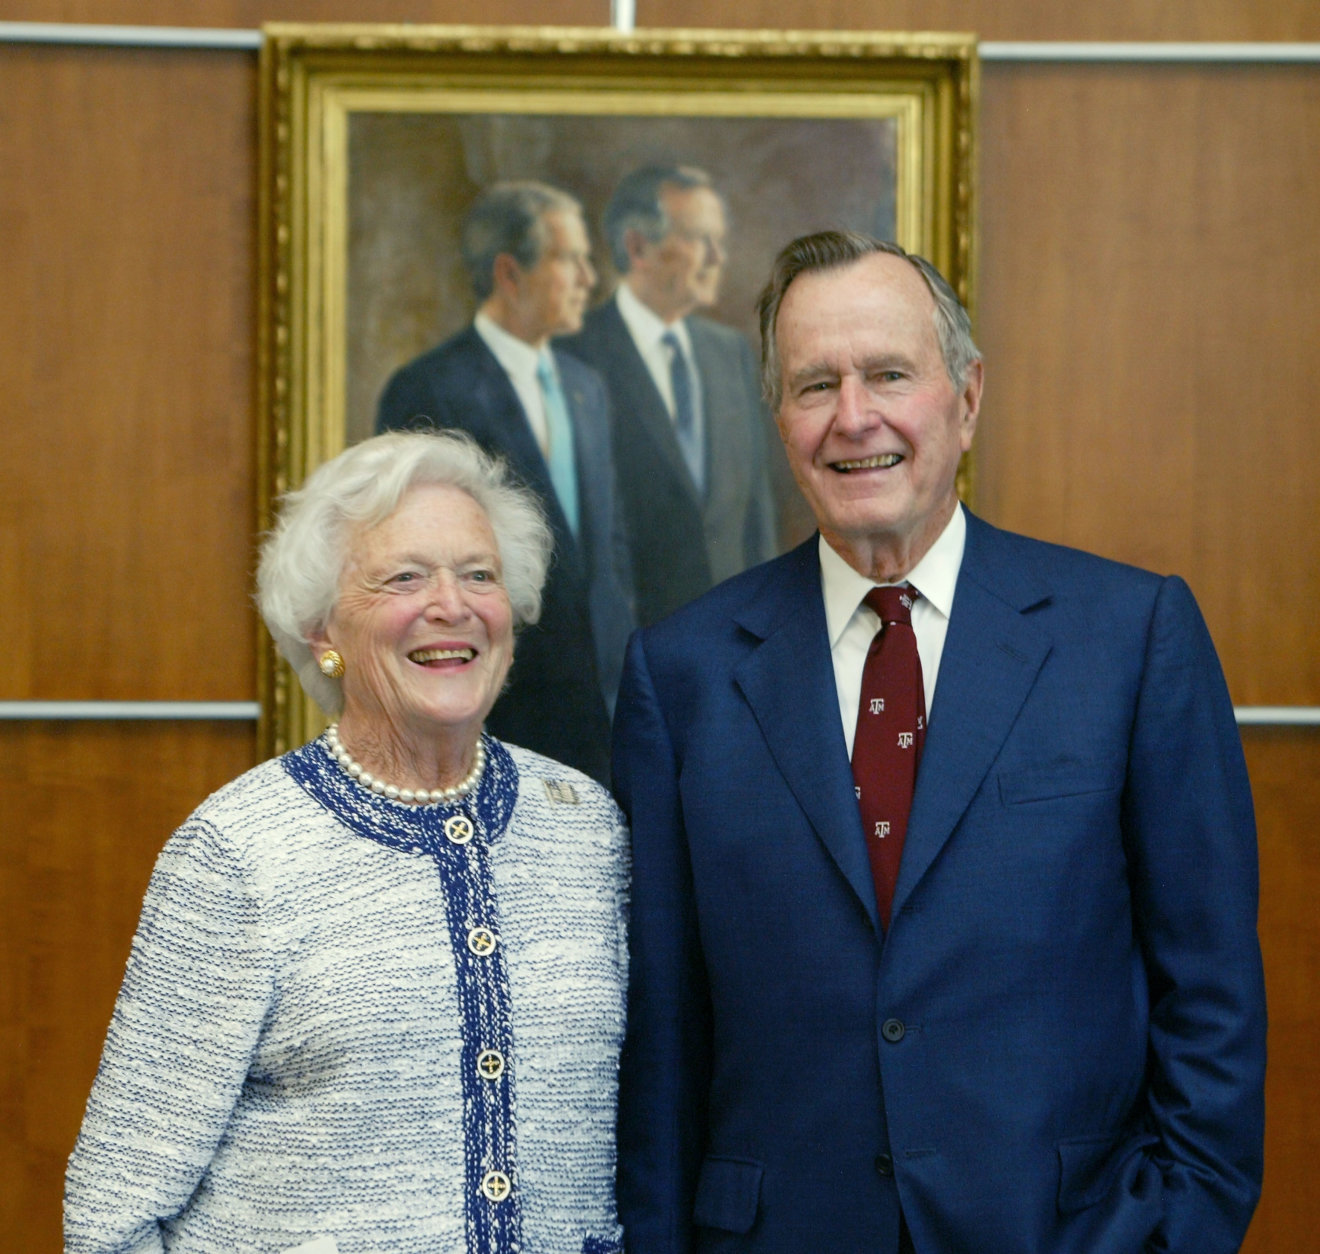 COLLEGE STATION, TX - APRIL 21:  Former U.S. President  George H.W. Bush and former first lady Barbara Bush attend a portrait unveiling at the George Bush Library April 21, 2003 in College Station, Texas. A painting of the father/son presidents went on display.  (Photo by Joe Mitchell/Getty Images)